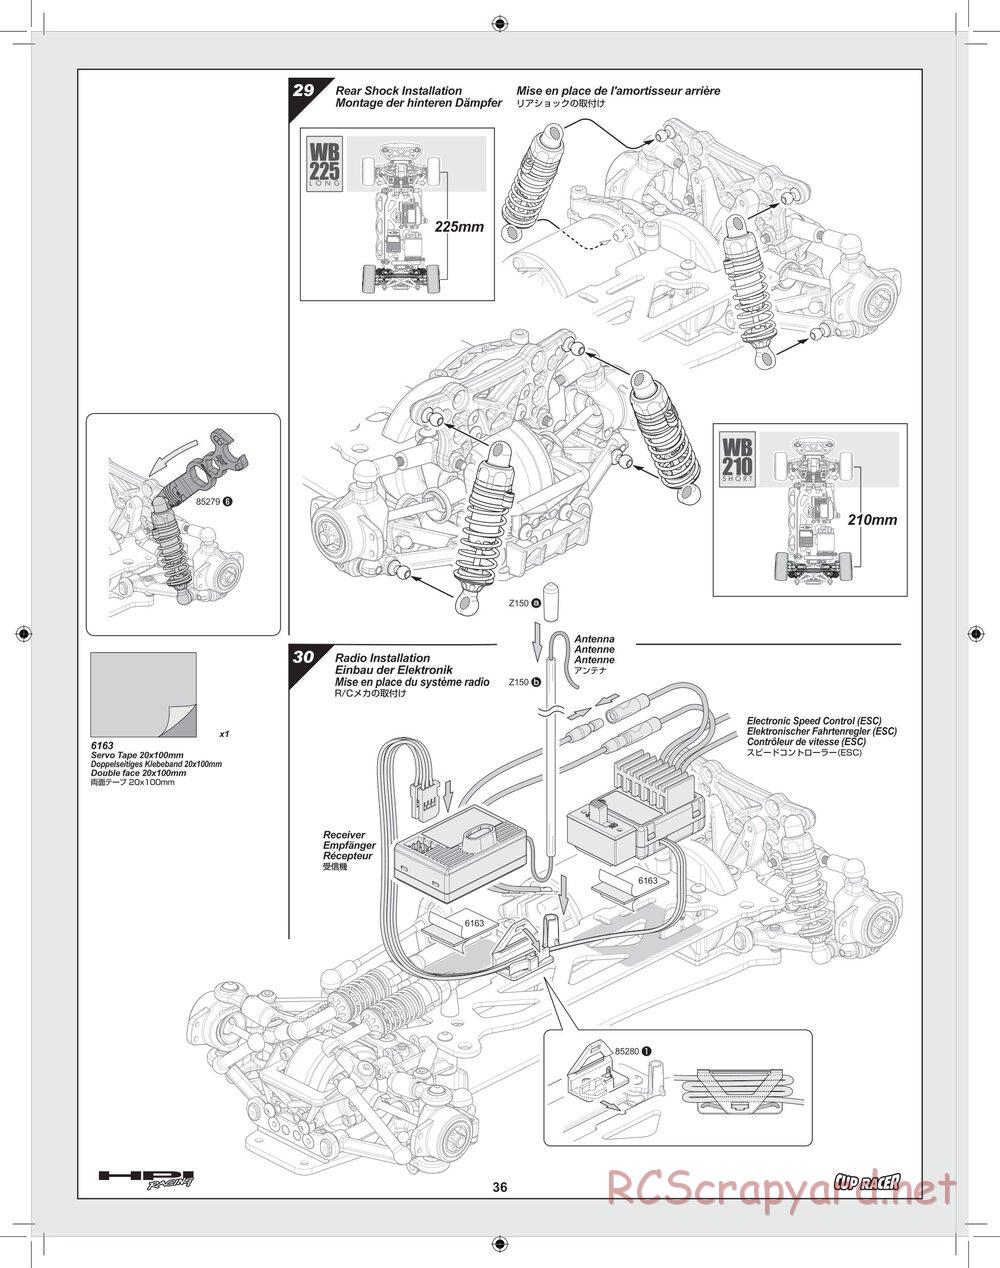 HPI - Cup Racer - Manual - Page 36